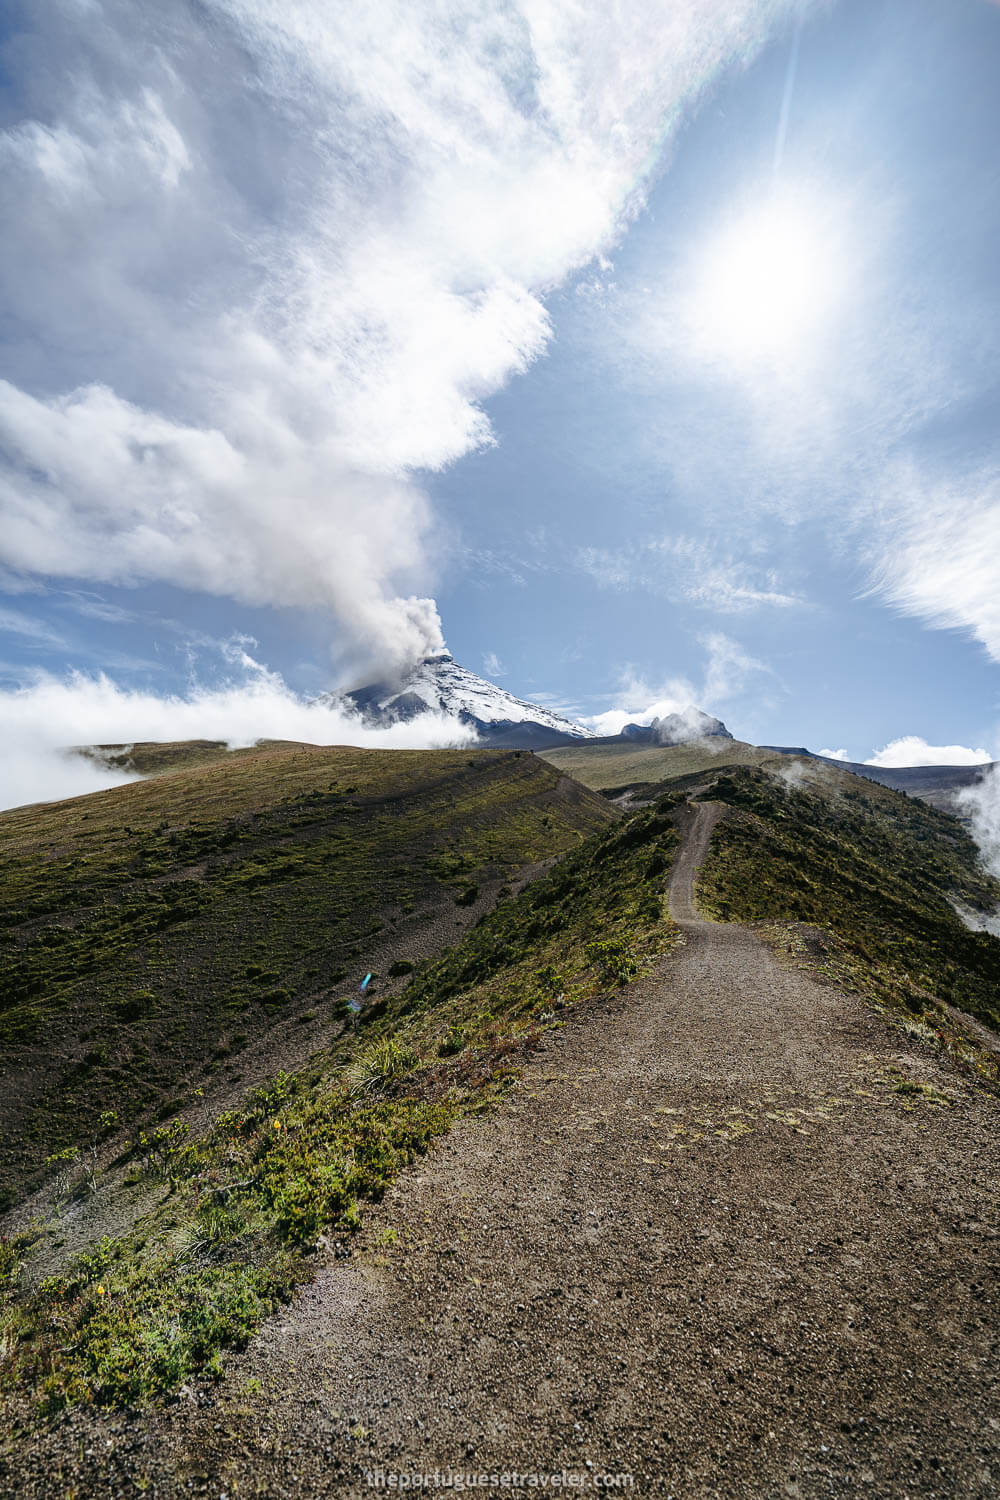 The first glimpse of Cotopaxi Volcano erupting